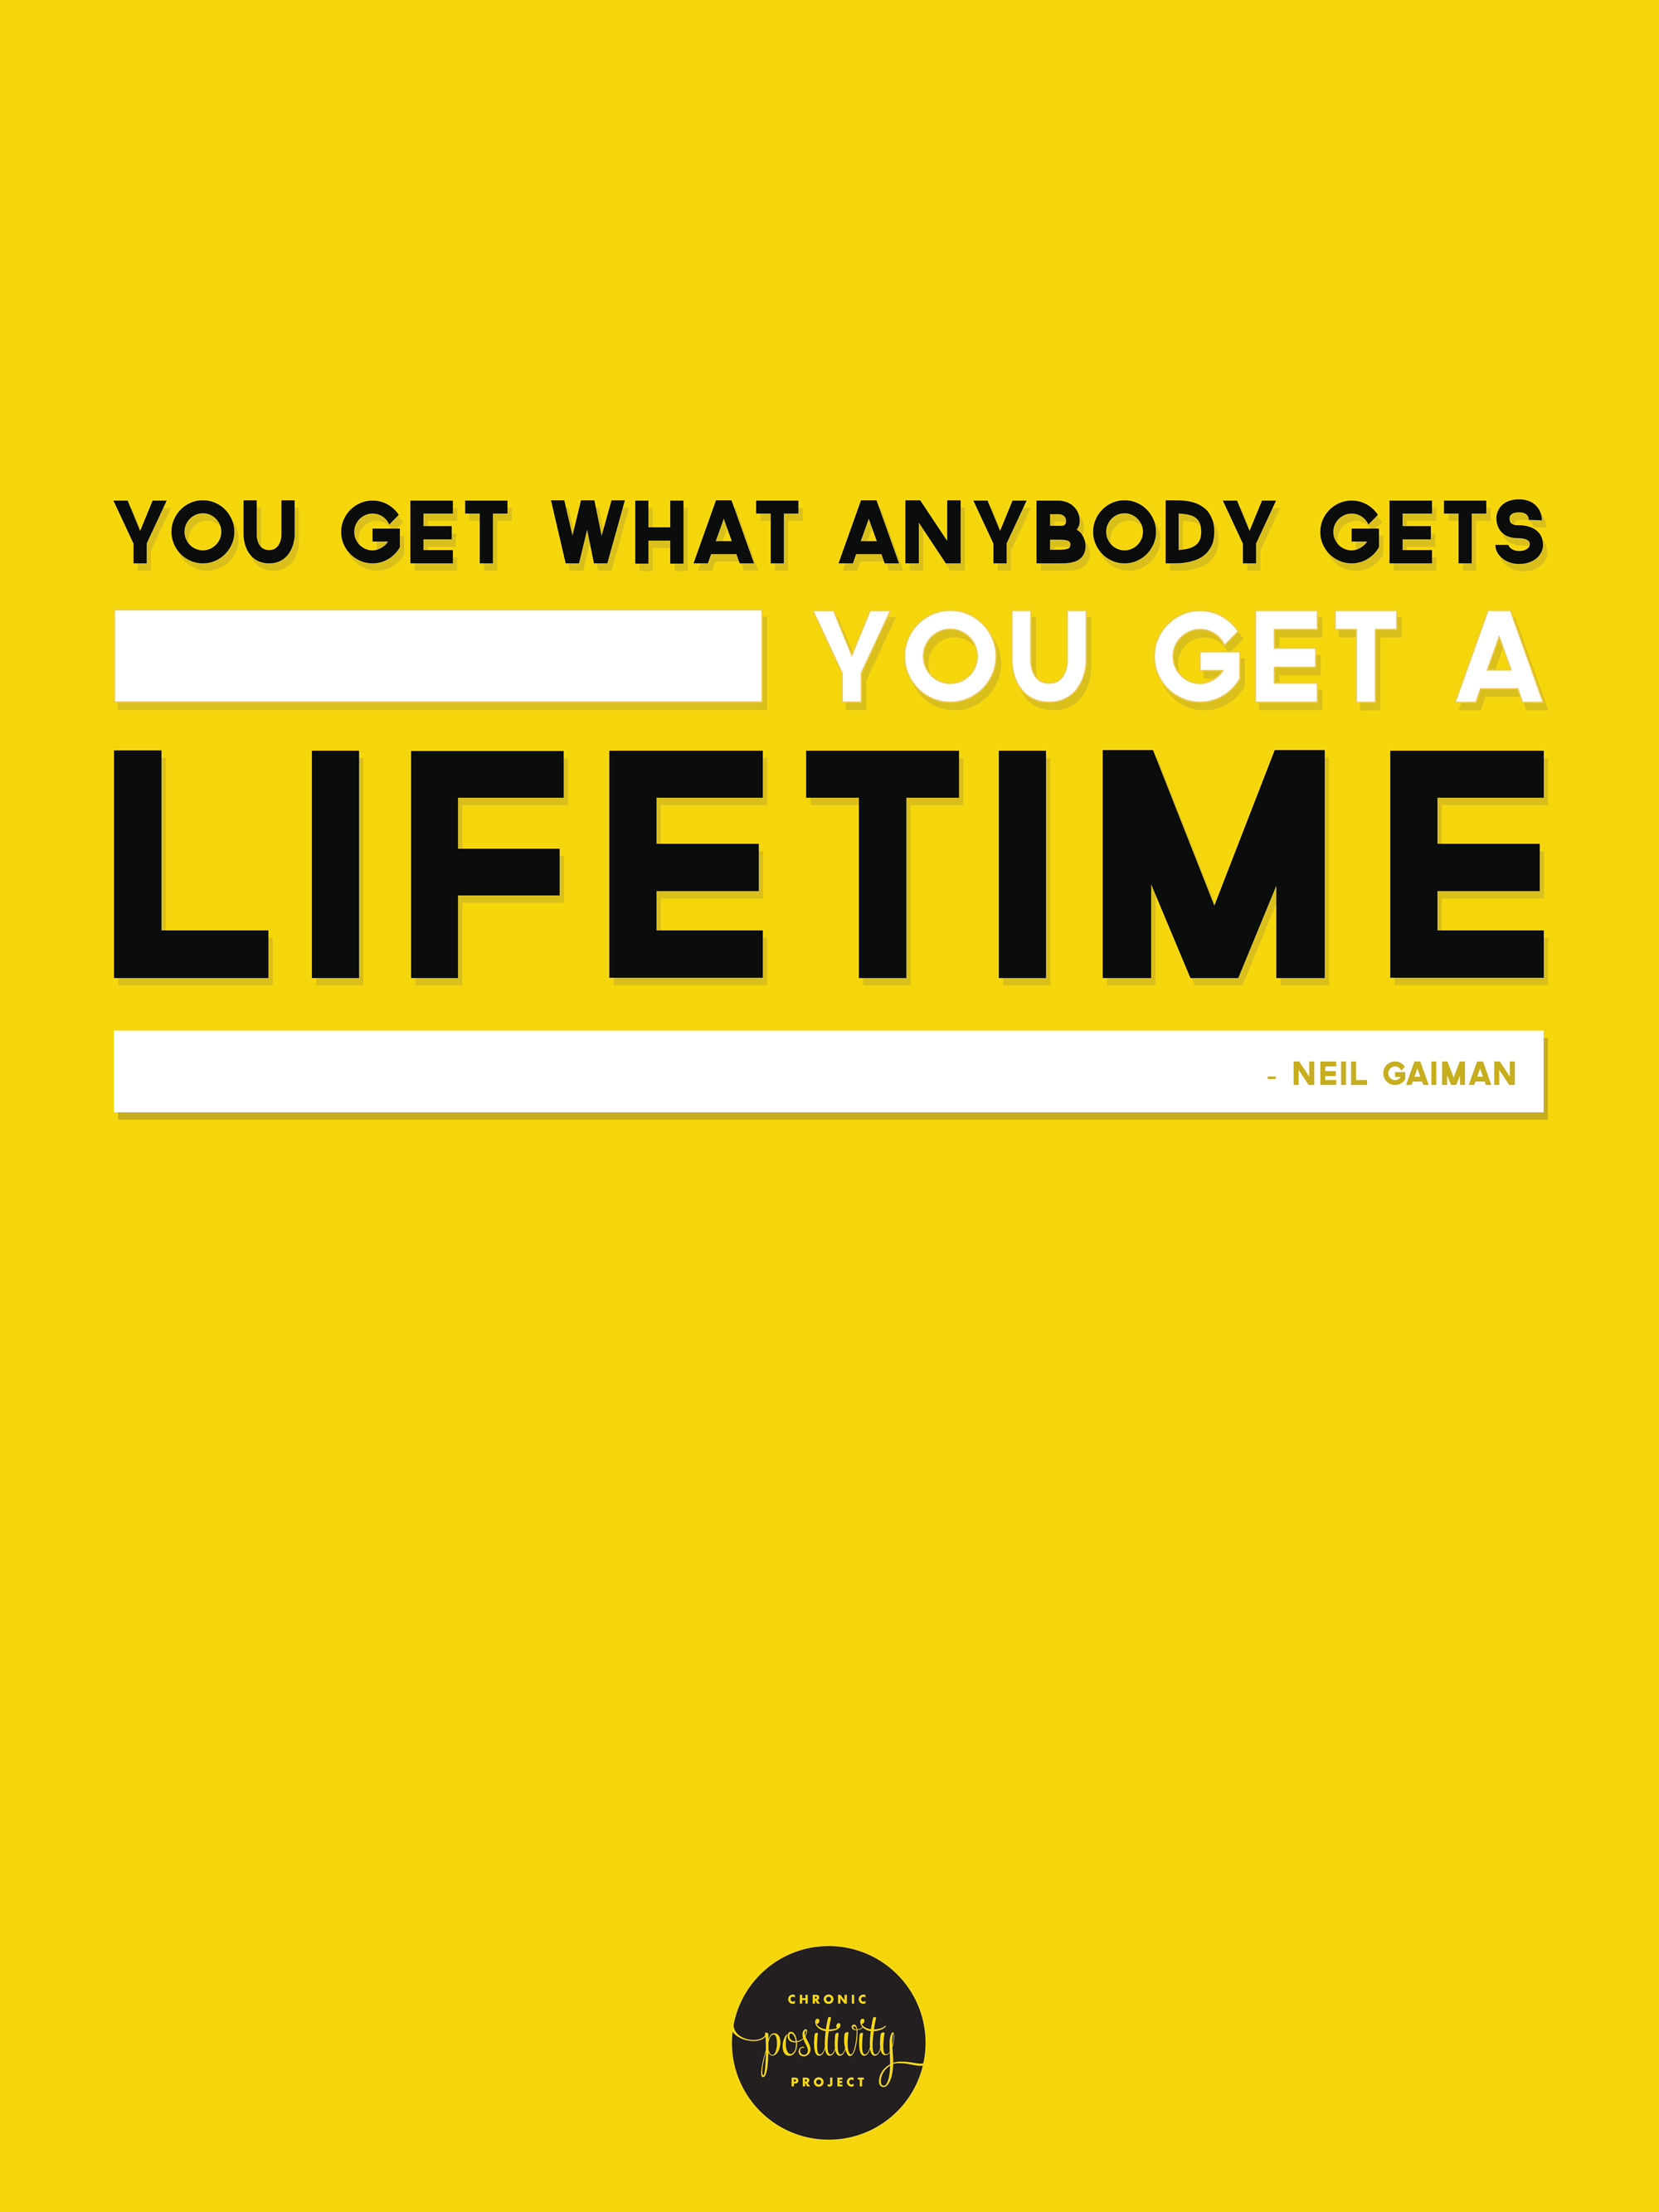 #43: You get what anybody gets- you get a lifetime. Neil Gaiman | Chronic Positivity Project | Inspiration Design by Mary Fran Wiley